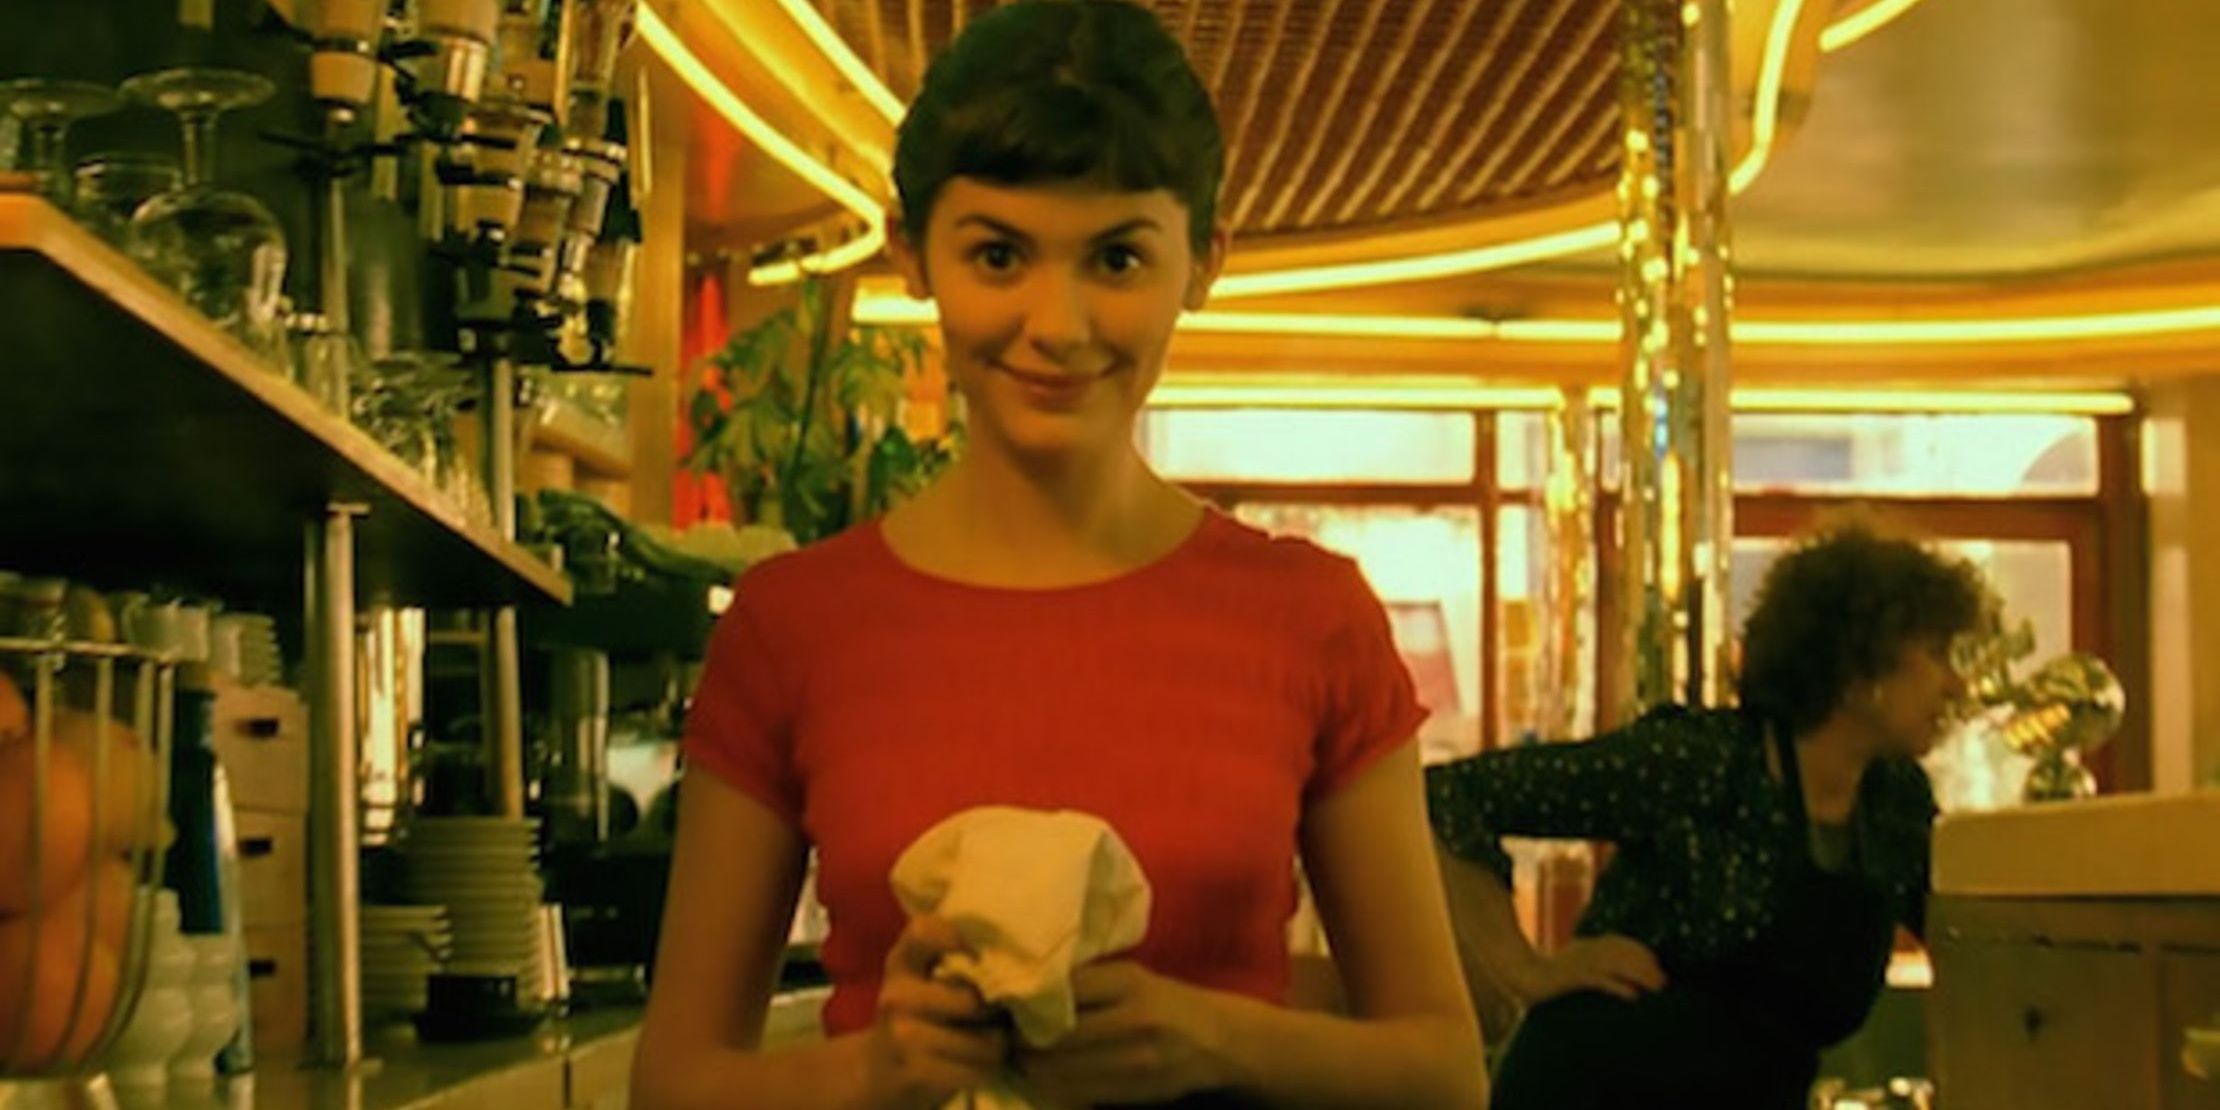 Scene from Amelie with Amlie smiling in the cafe.